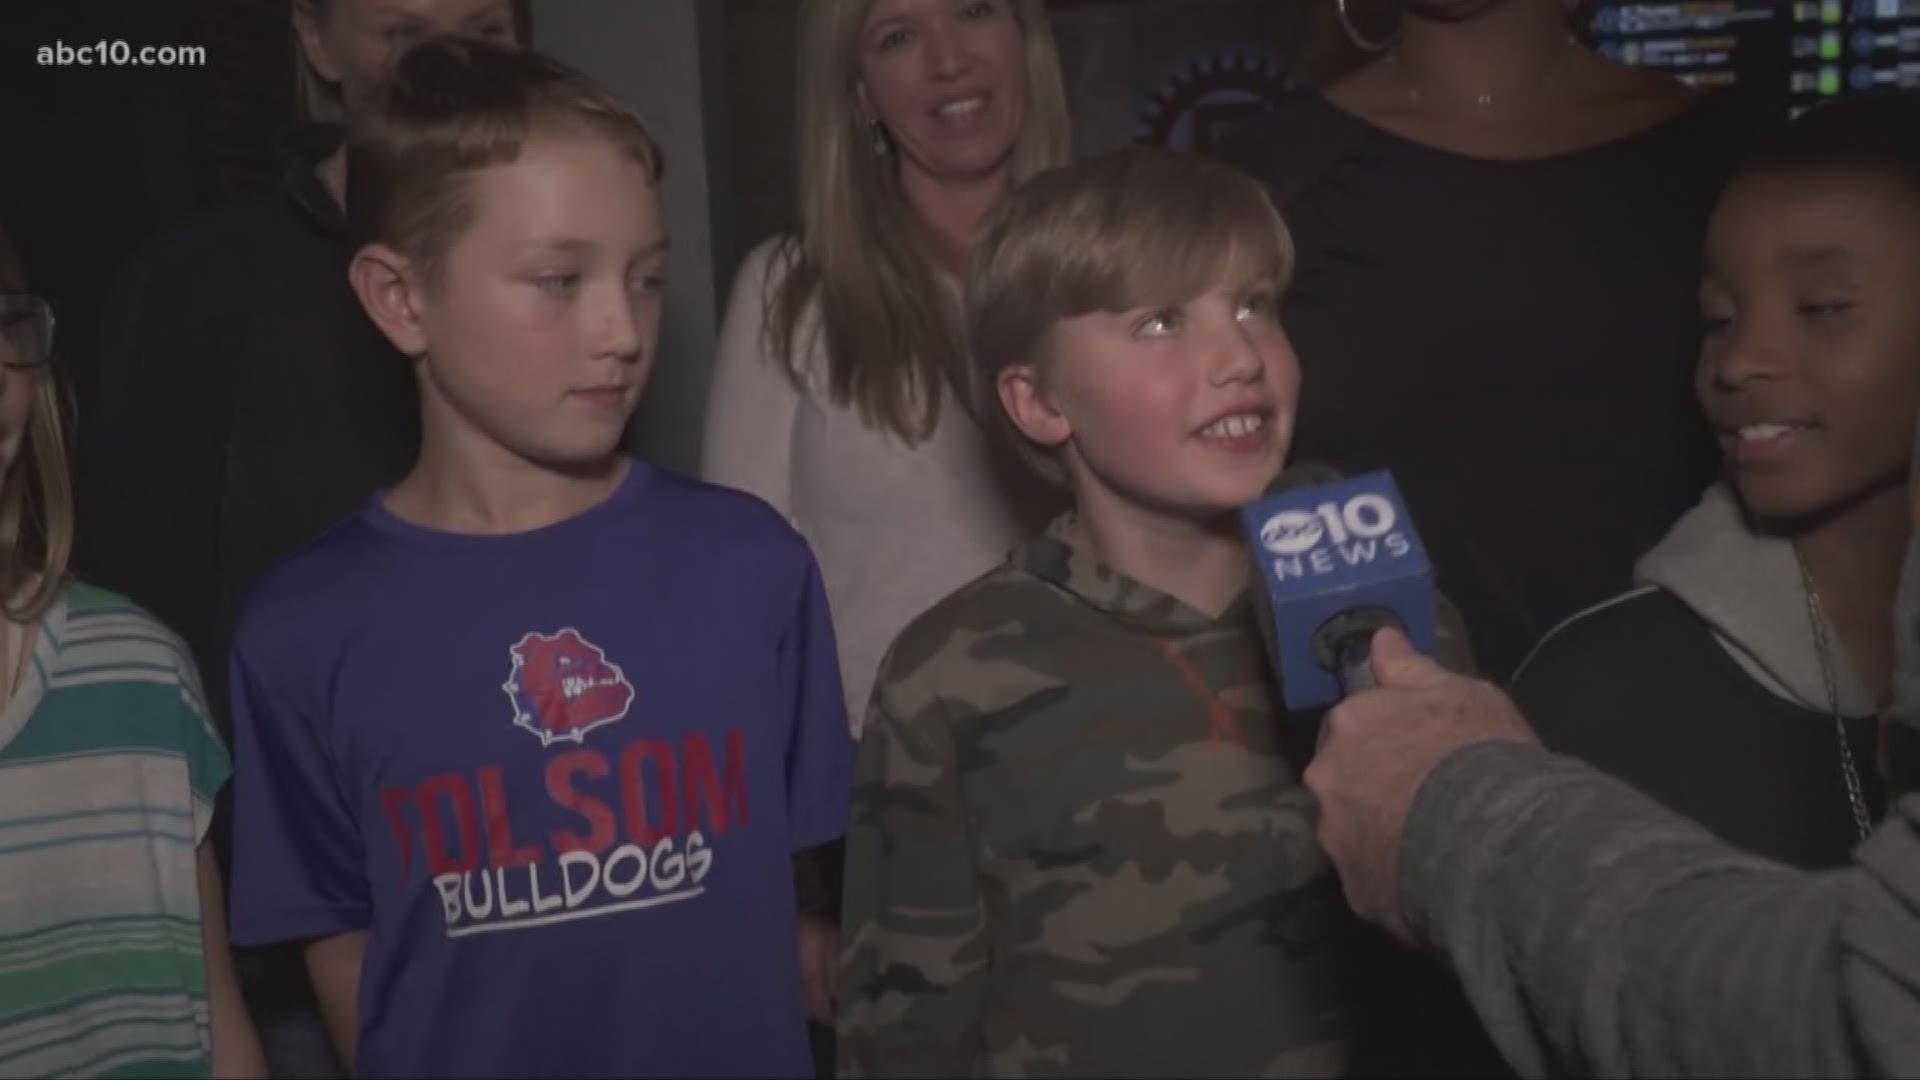 "Escape Room" is a new movie. And a successful one at that. But this one in Folsom is a real escape room, and Mark S. Allen took some families to try it out.